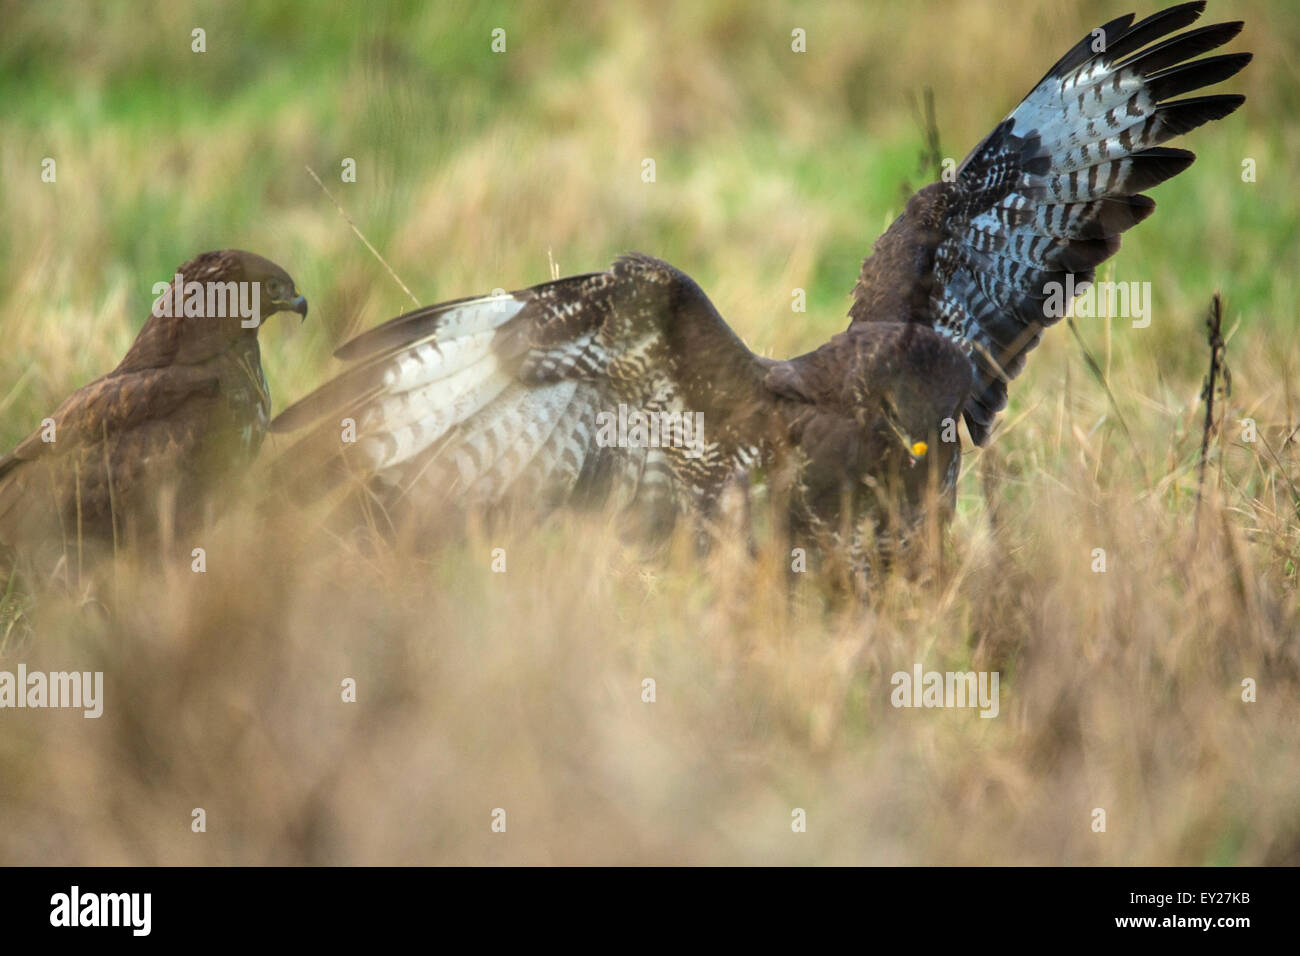 Common Buzzard protect its prey against another buzzard Stock Photo